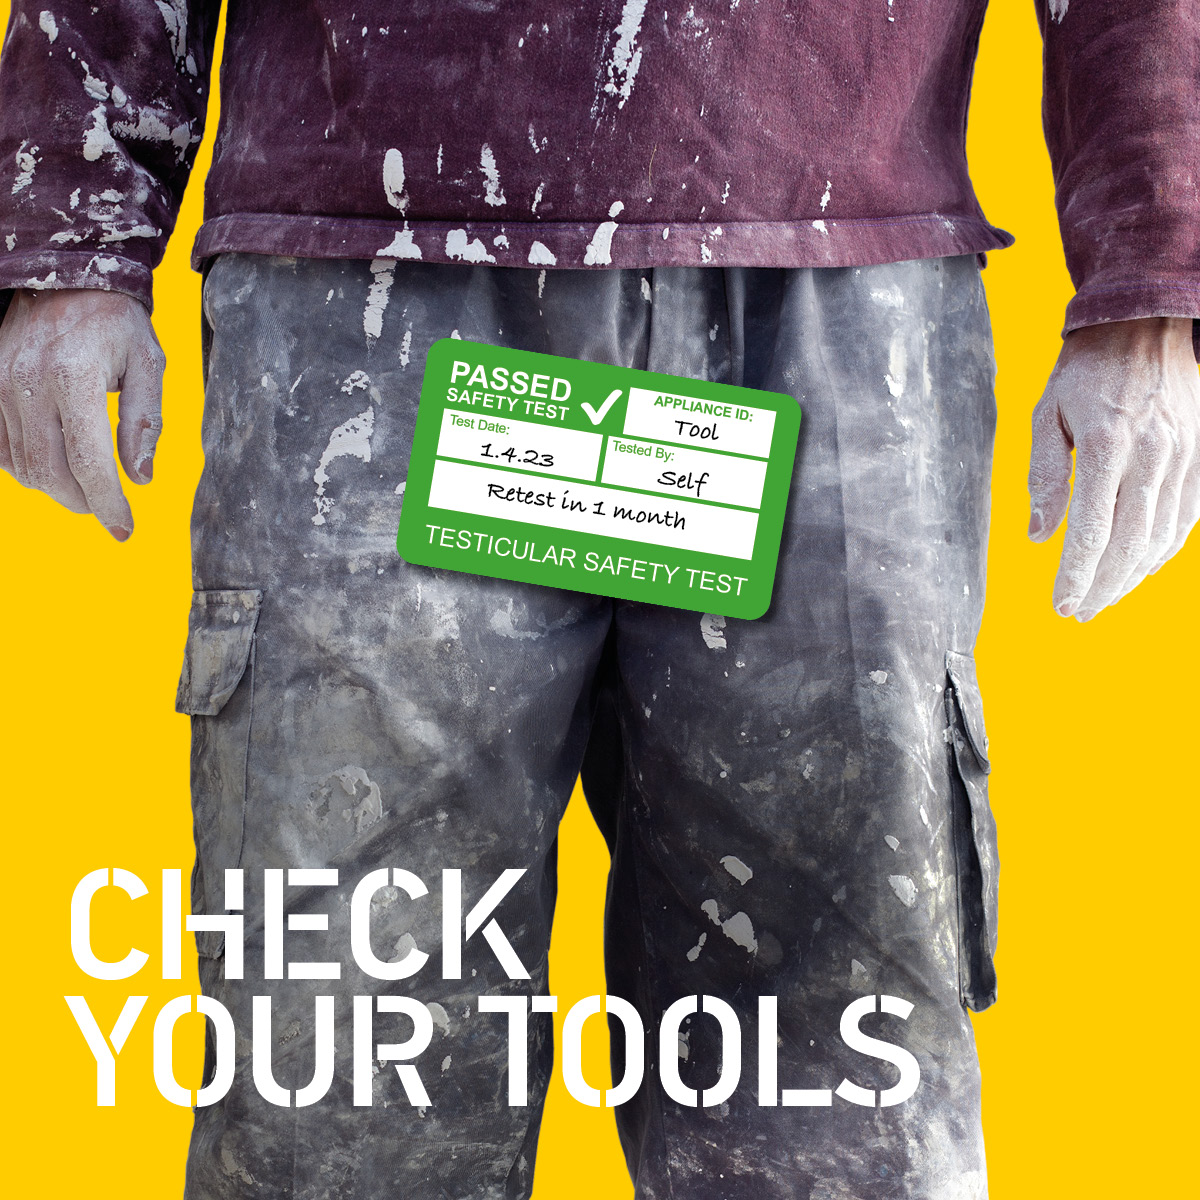 And finally... Tradesmen told to ‘grab April by the balls’ and check their tools